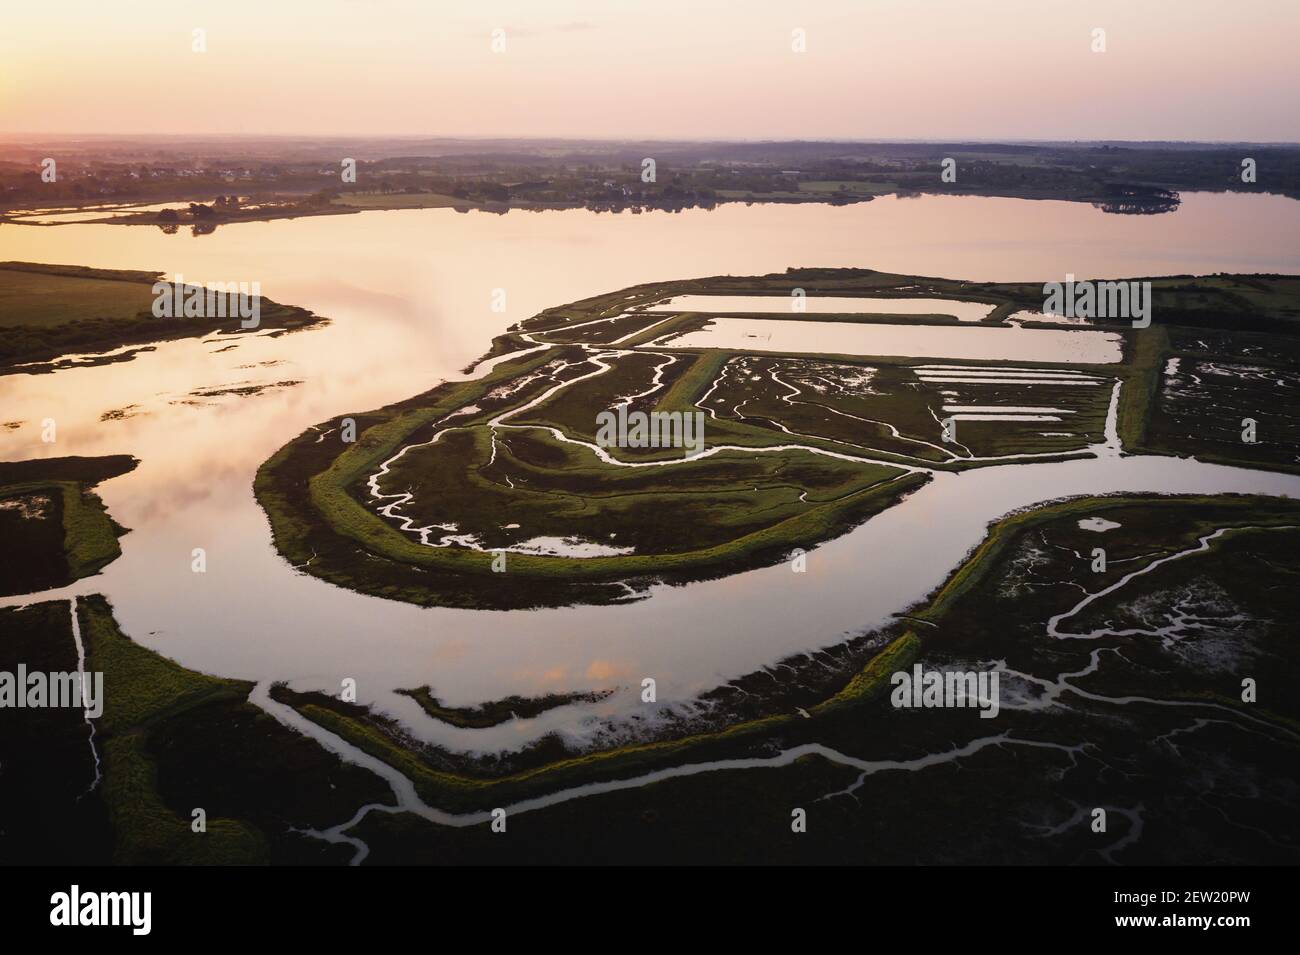 France, Morbihan, aerial view of the Séné marshes nature reserve at dawn (aerial view) Stock Photo